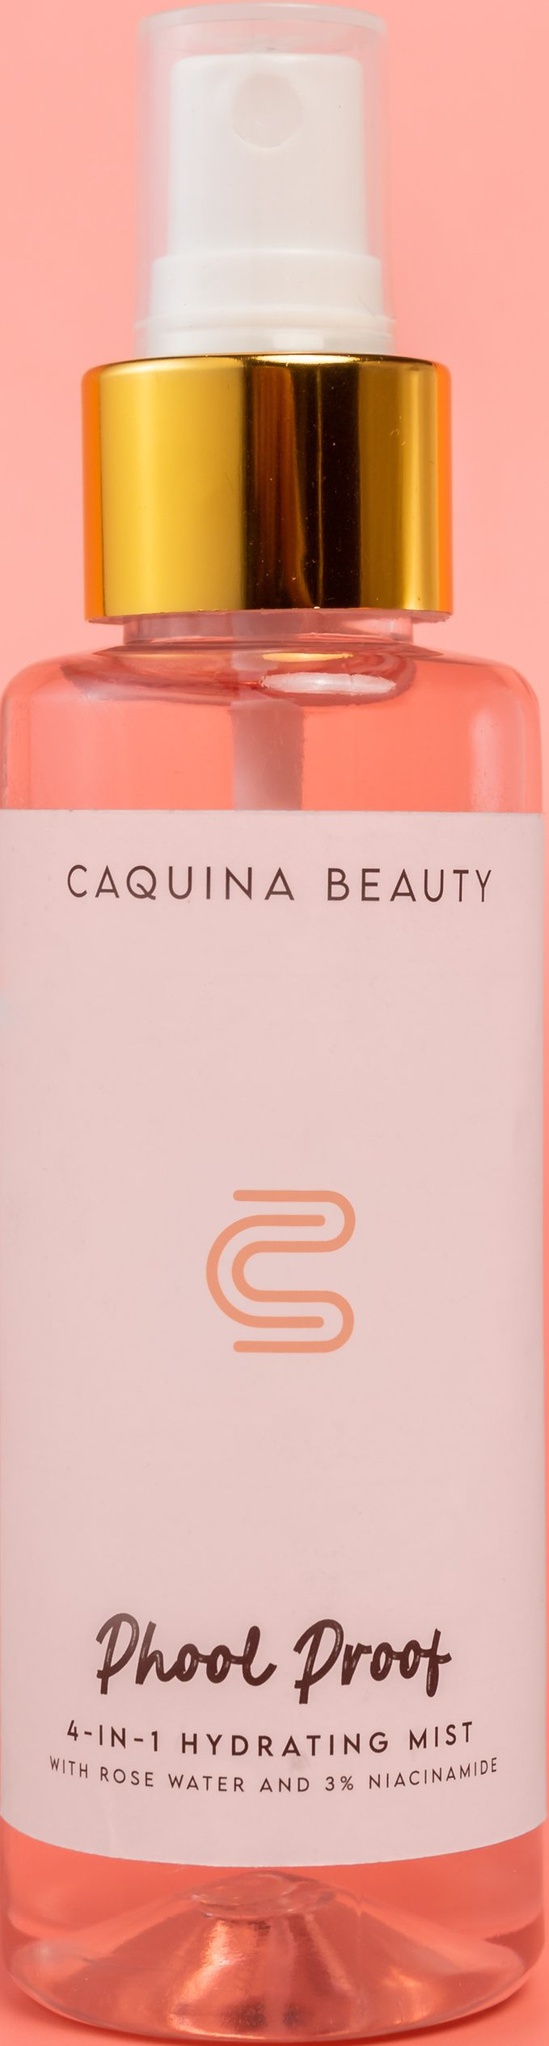 Caquina Beauty Phool Proof 4-in-1 Hydrating Mist